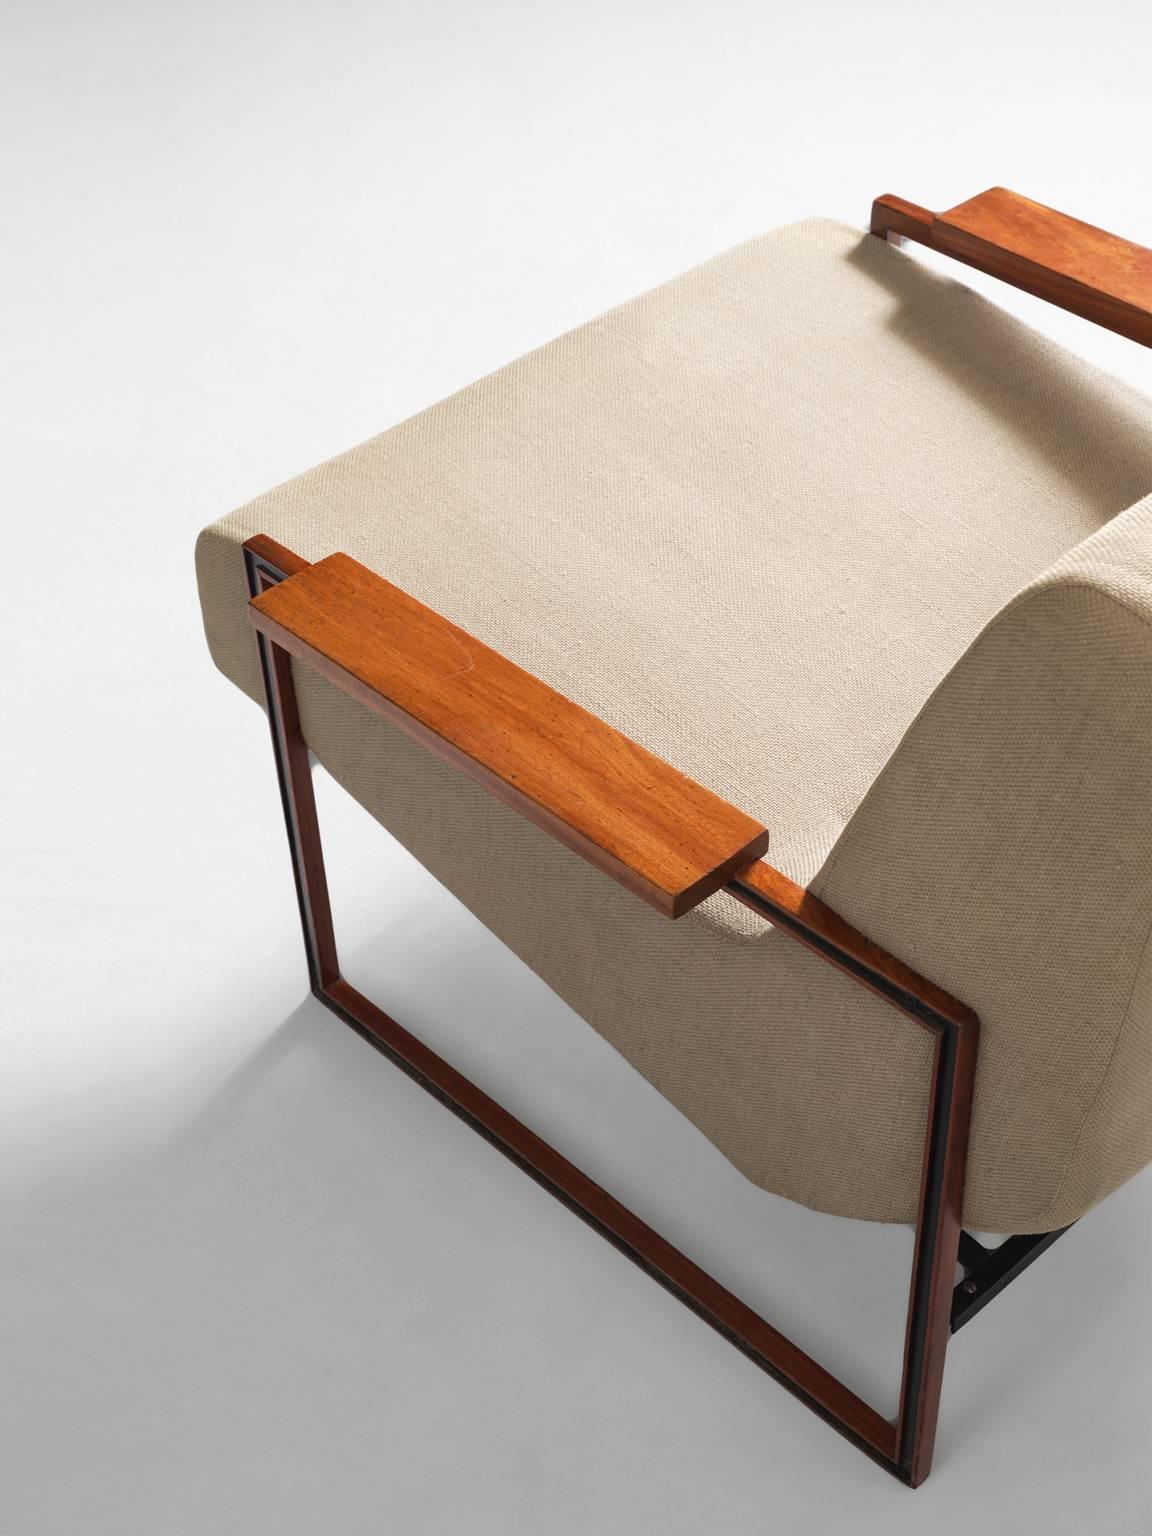 Metal Percival Lafer Lounge Chair in Mahogany and Fabric Upholstery